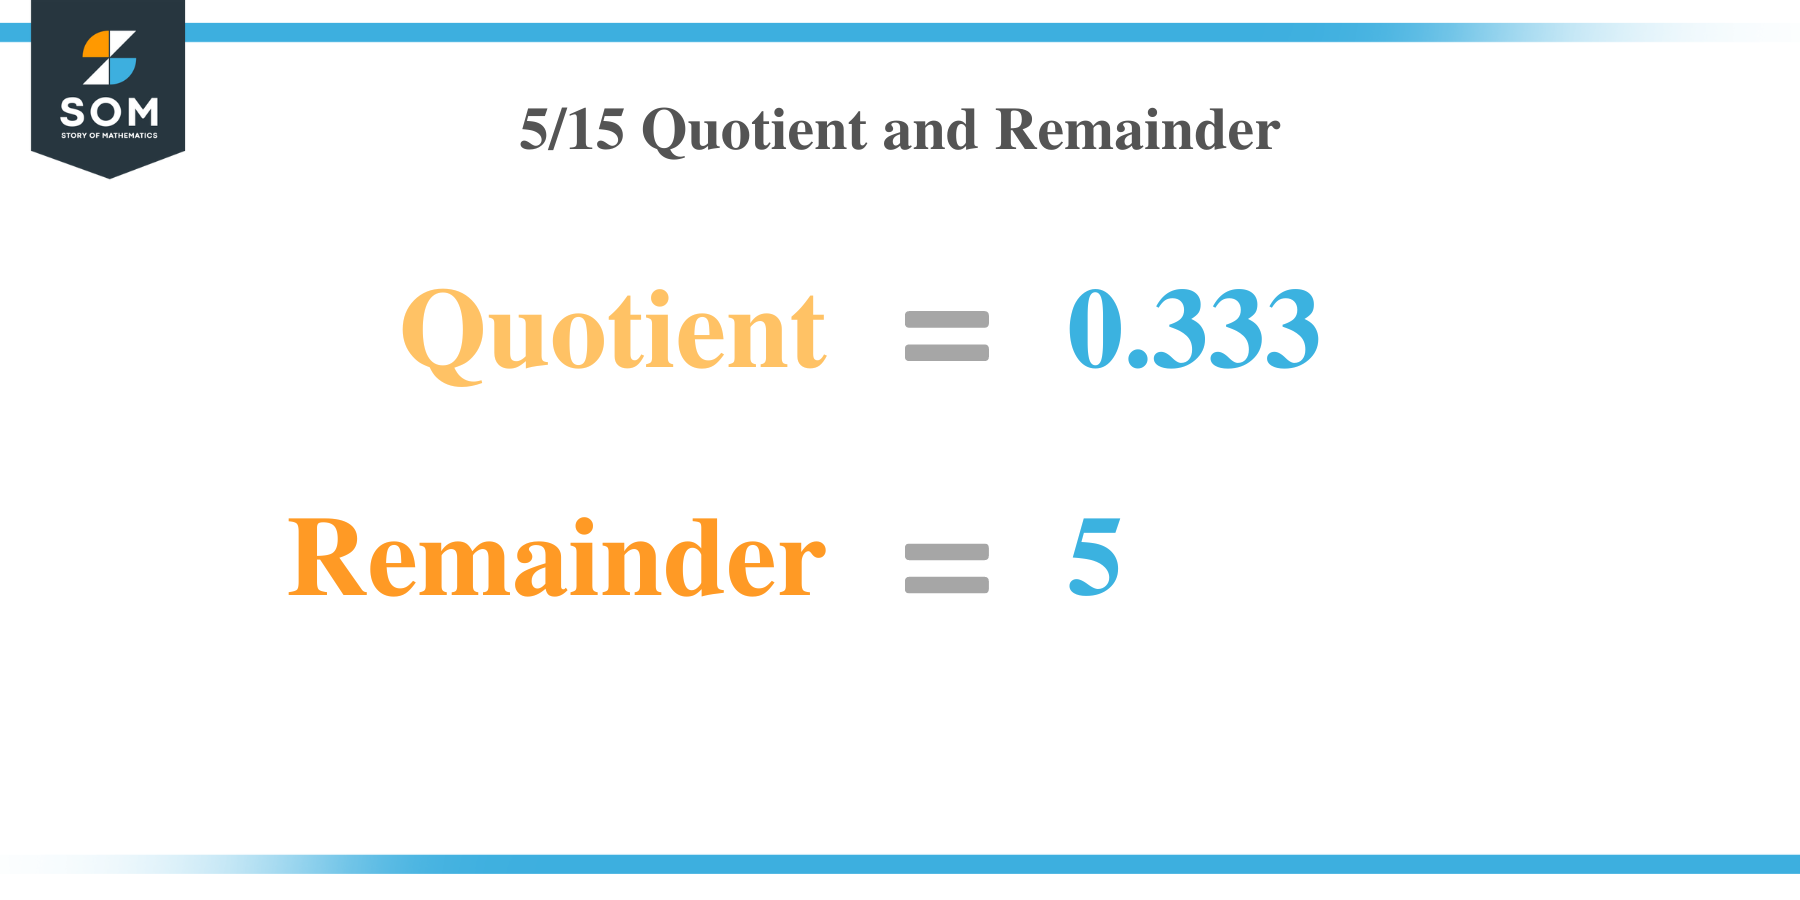 5 by 15 Quotient and Remainder